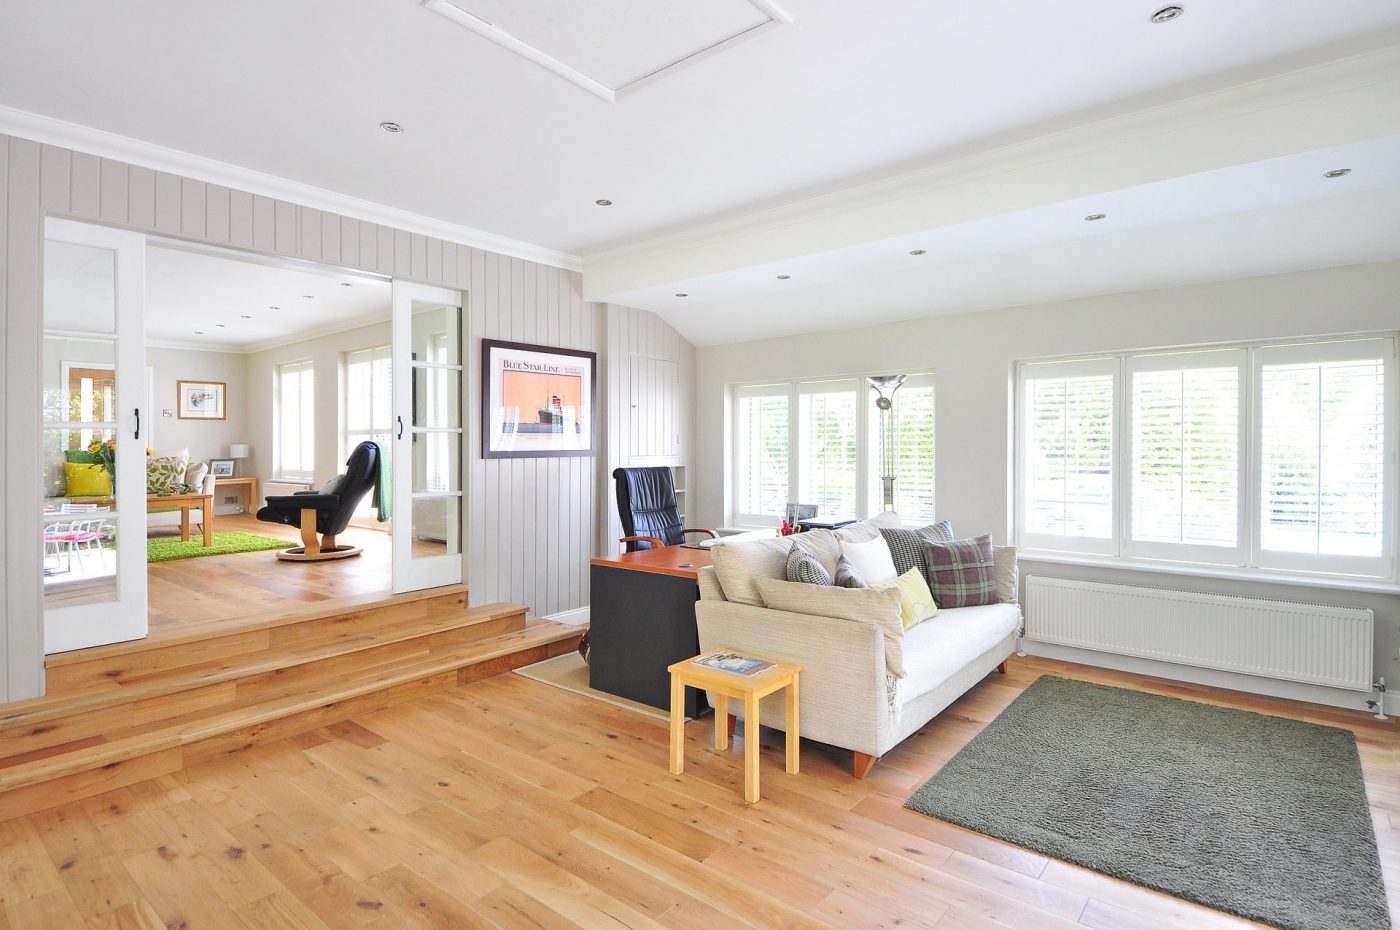 5 Reasons To Invest In Wooden Floors For Your Home